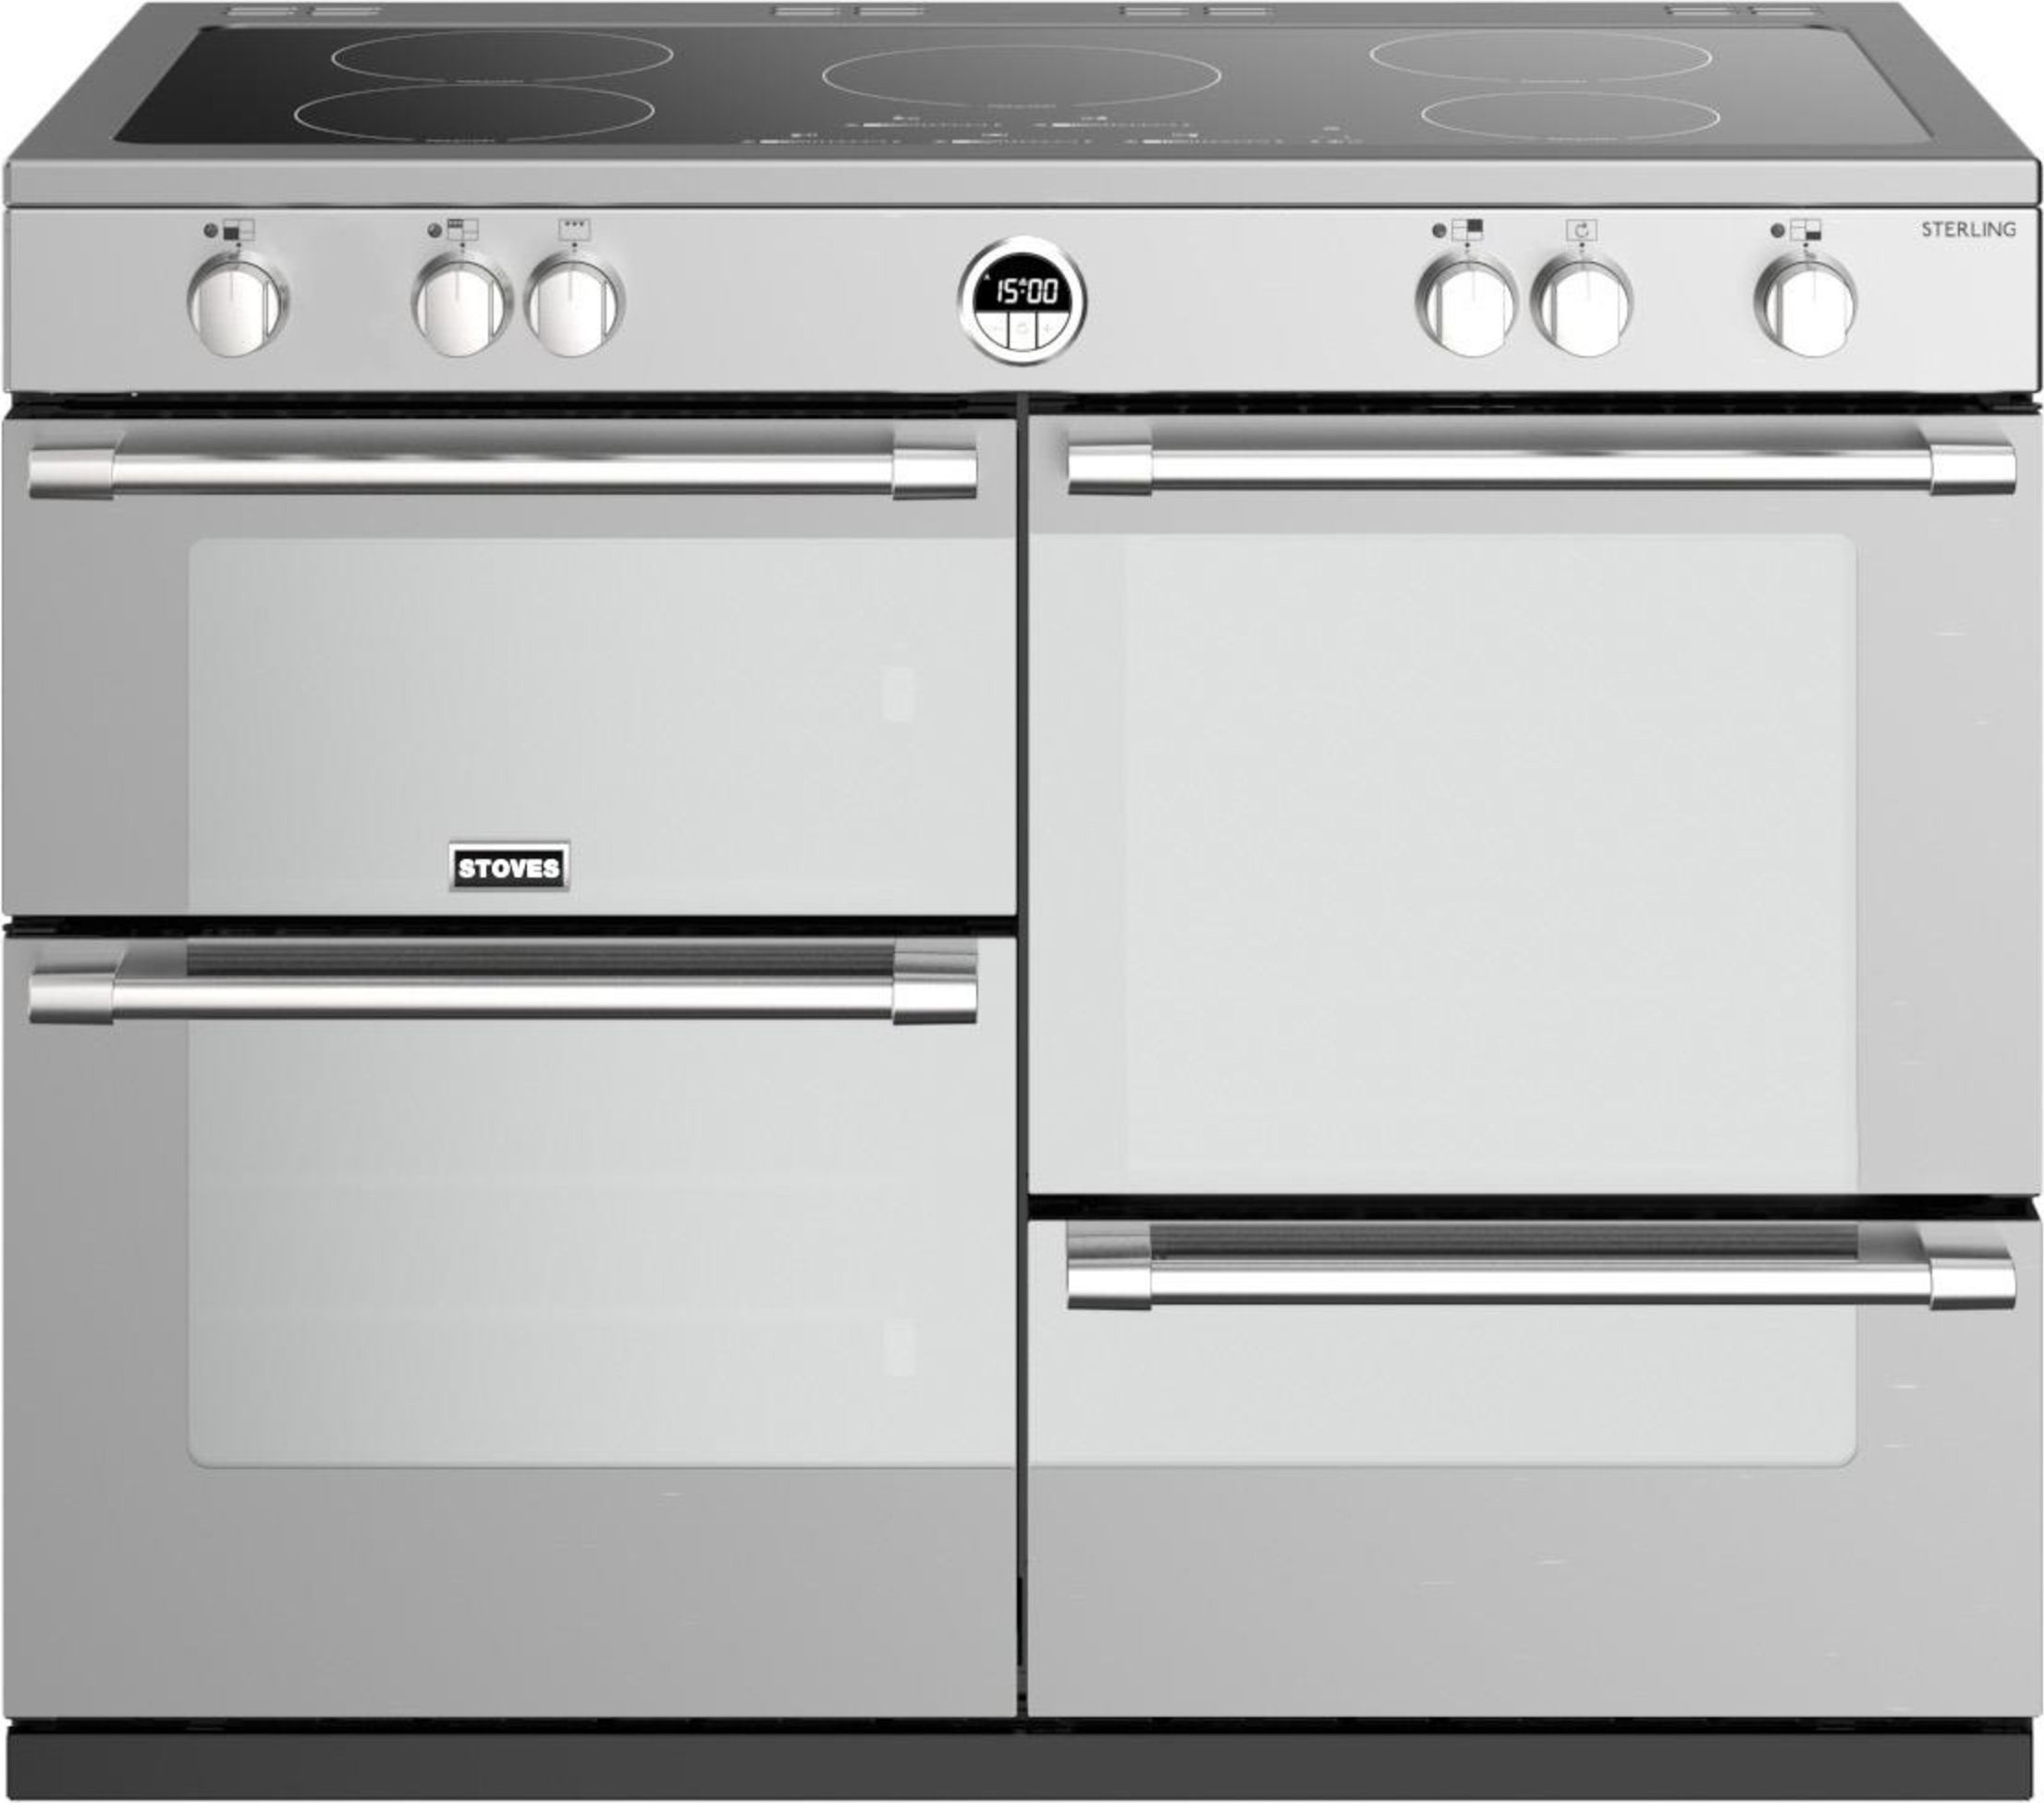 Stoves Sterling ST STER S1100Ei MK22 SS 100cm Electric Range Cooker with Induction Hob - Stainless Steel - A Rated, Stainless Steel